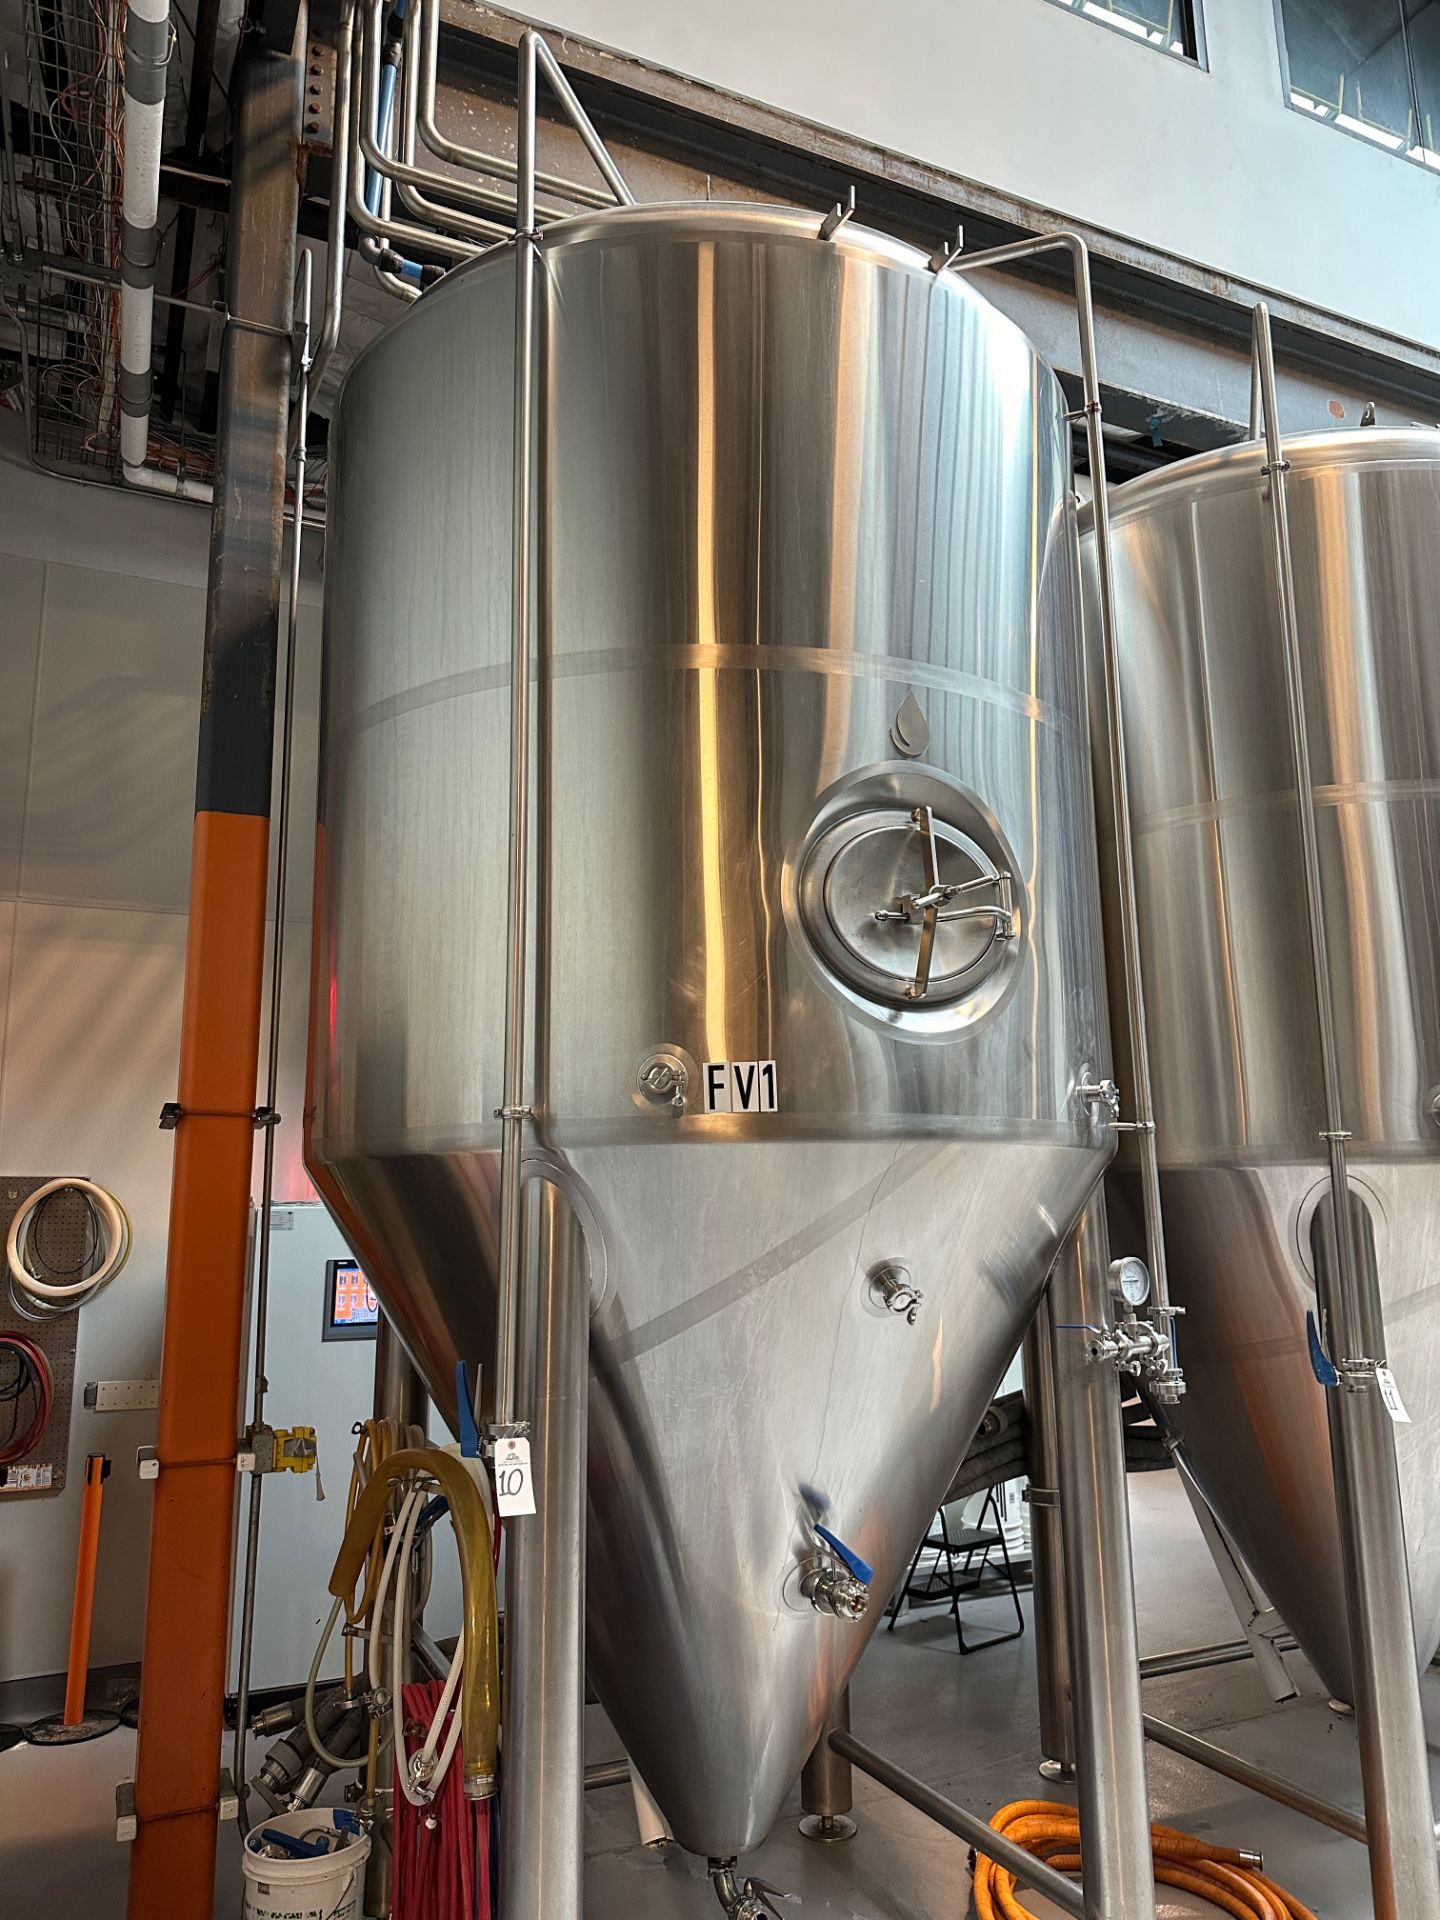 Complete 40 BBL Microbrewery - 40 BBL Deutsche 4-Vessel Brewhouse, Tanks, Can Line - See Description - Image 34 of 335